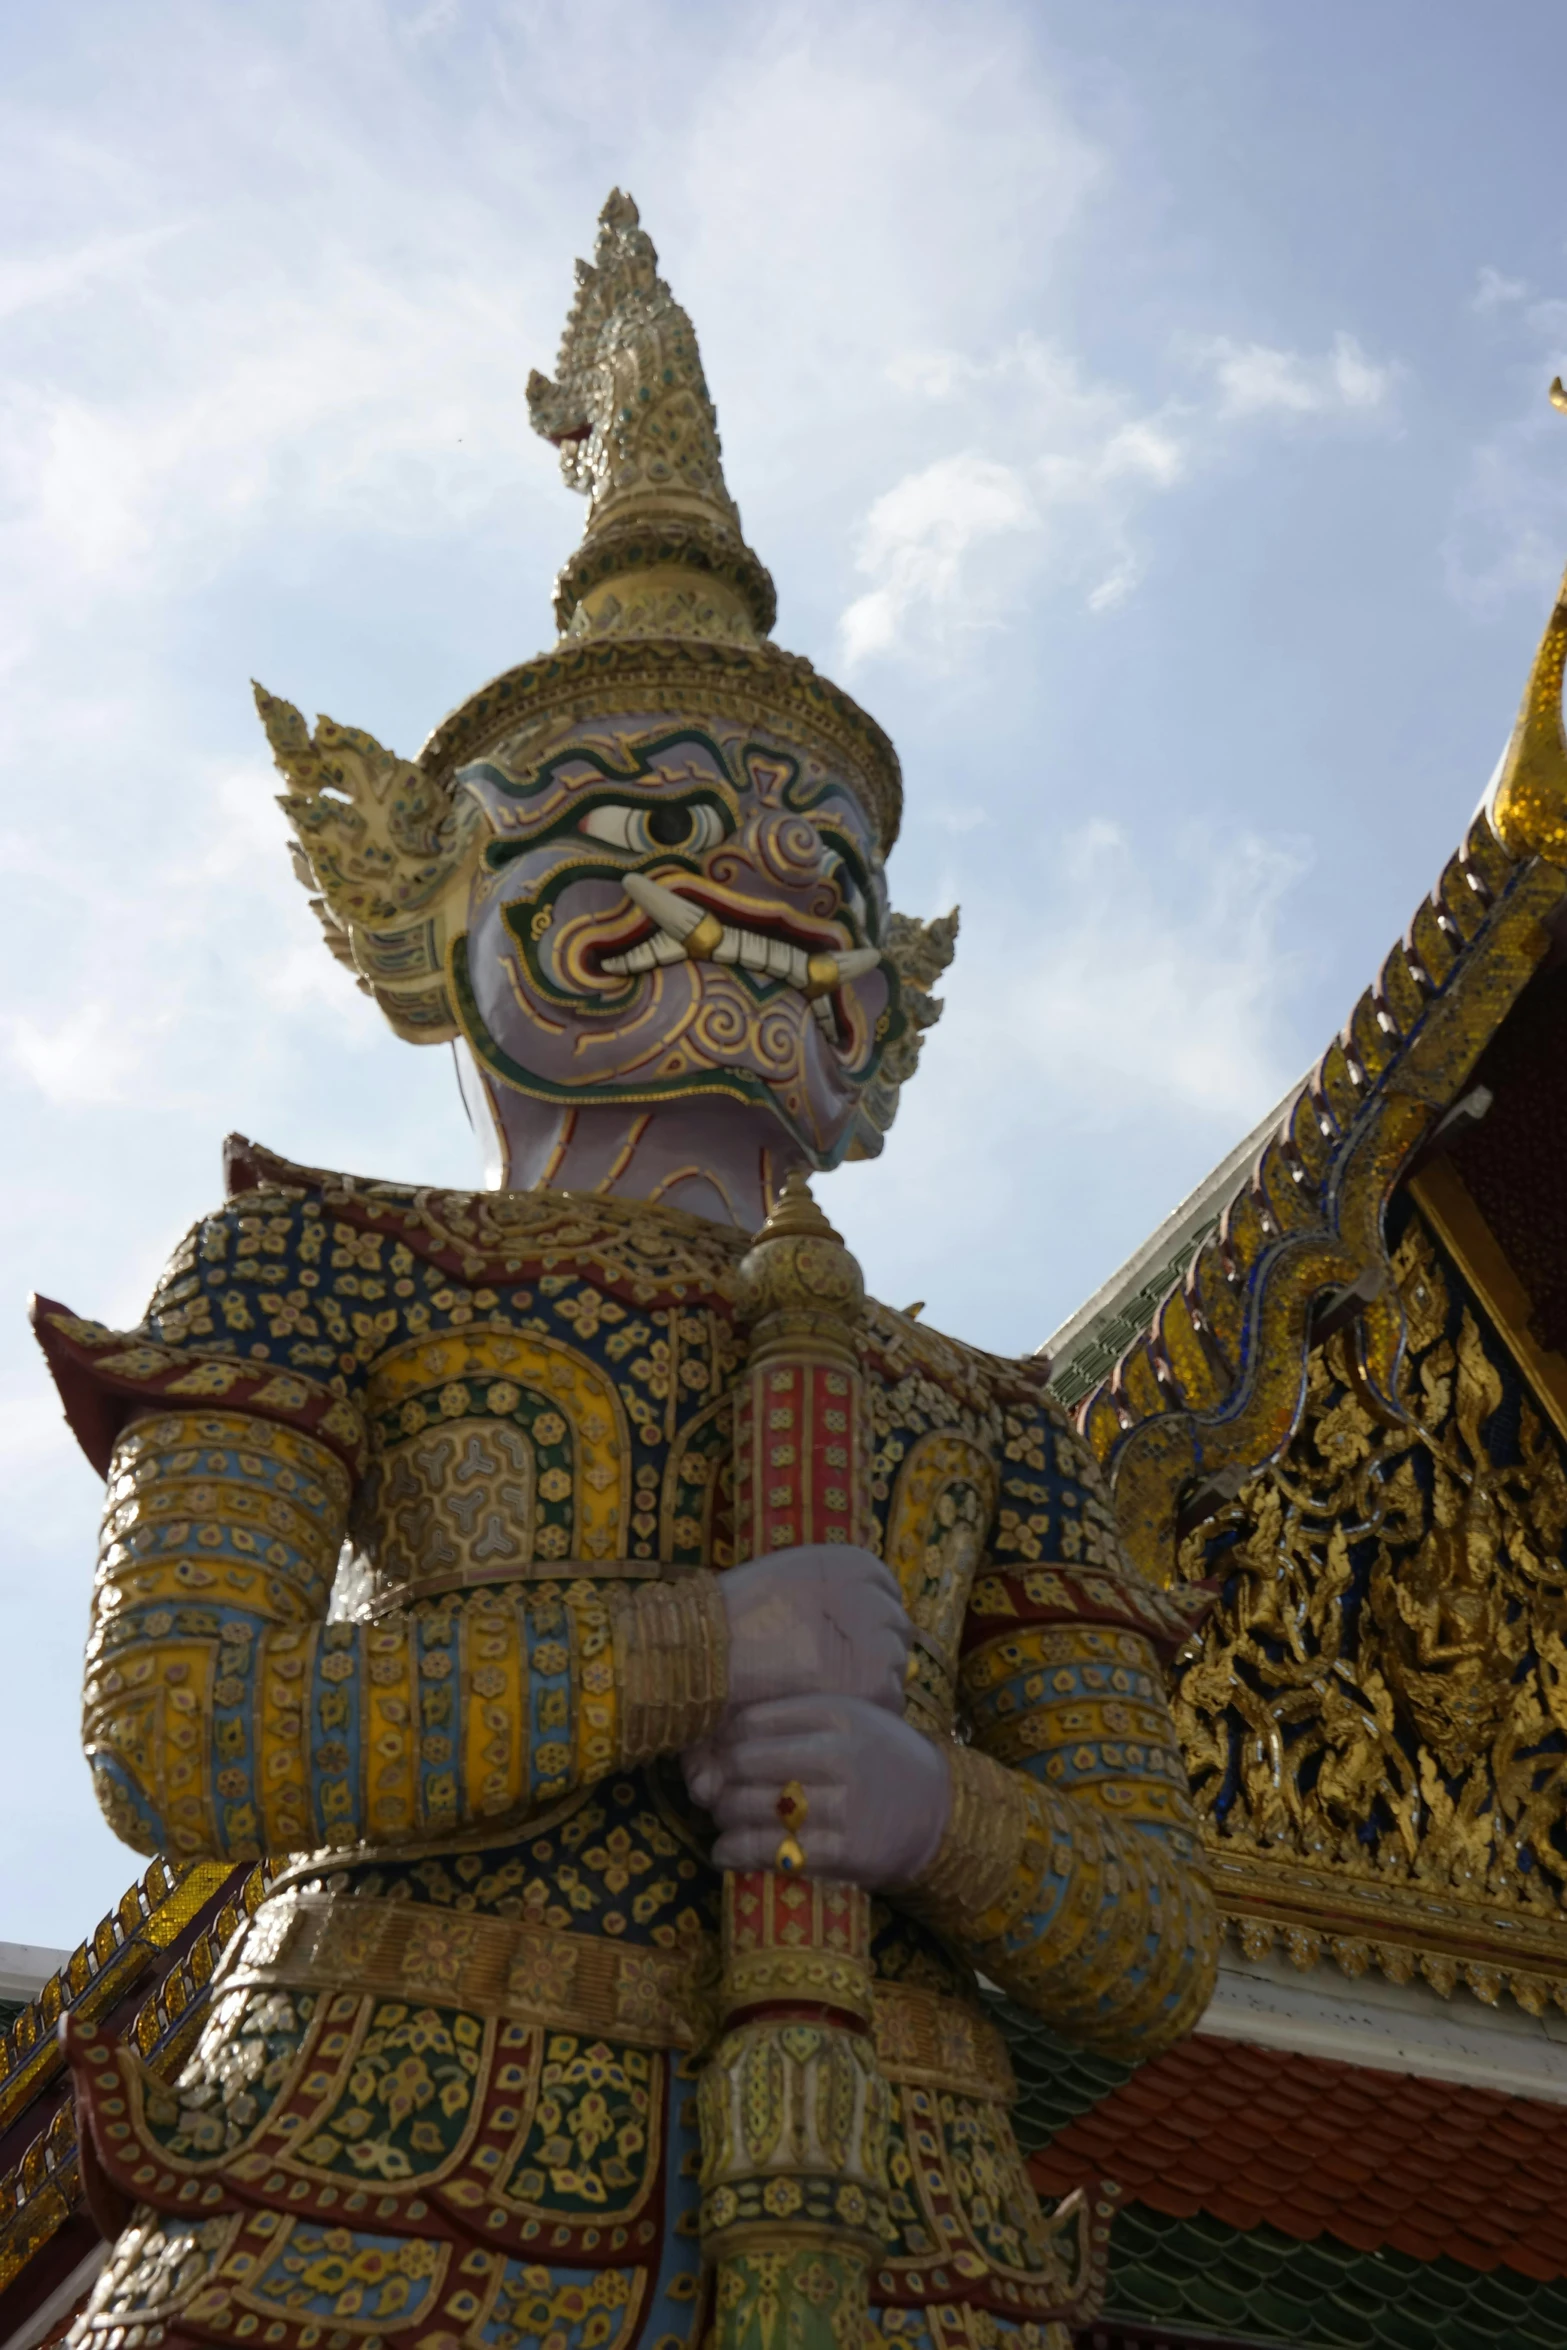 a close up of a statue in front of a building, bangkok, intricate detailed roof, heavy gold armour, square